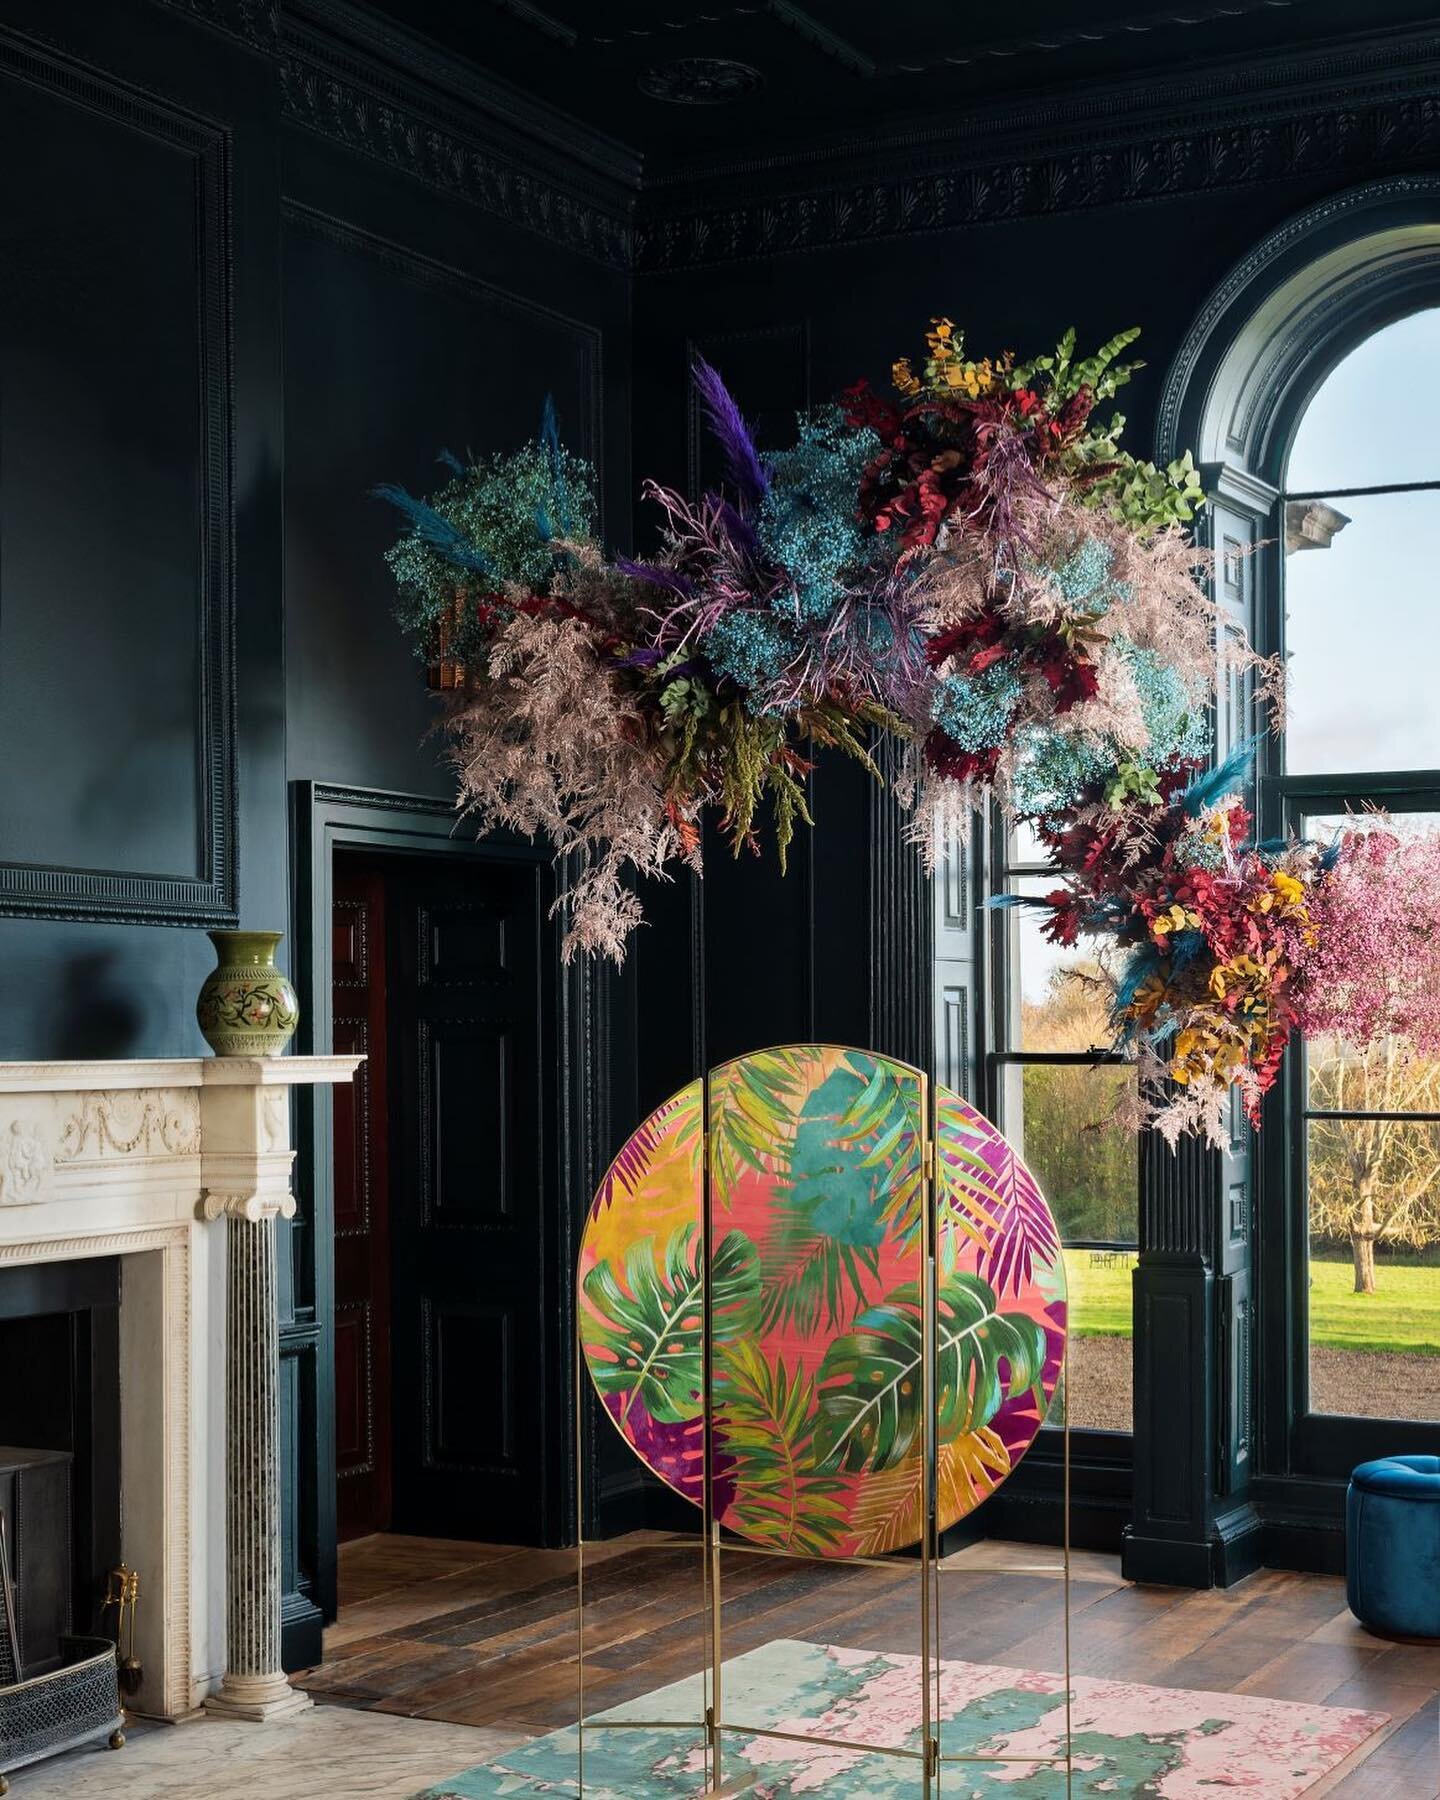 &lsquo;The cheeriest English furniture we&rsquo;ve seen .. after a year spent watching newscasters surrounded by sad potted plants and spare bookshelves a breath of fresh air&rsquo; writes #jillkrasny for The Study @1stdibs on the new collection @mat